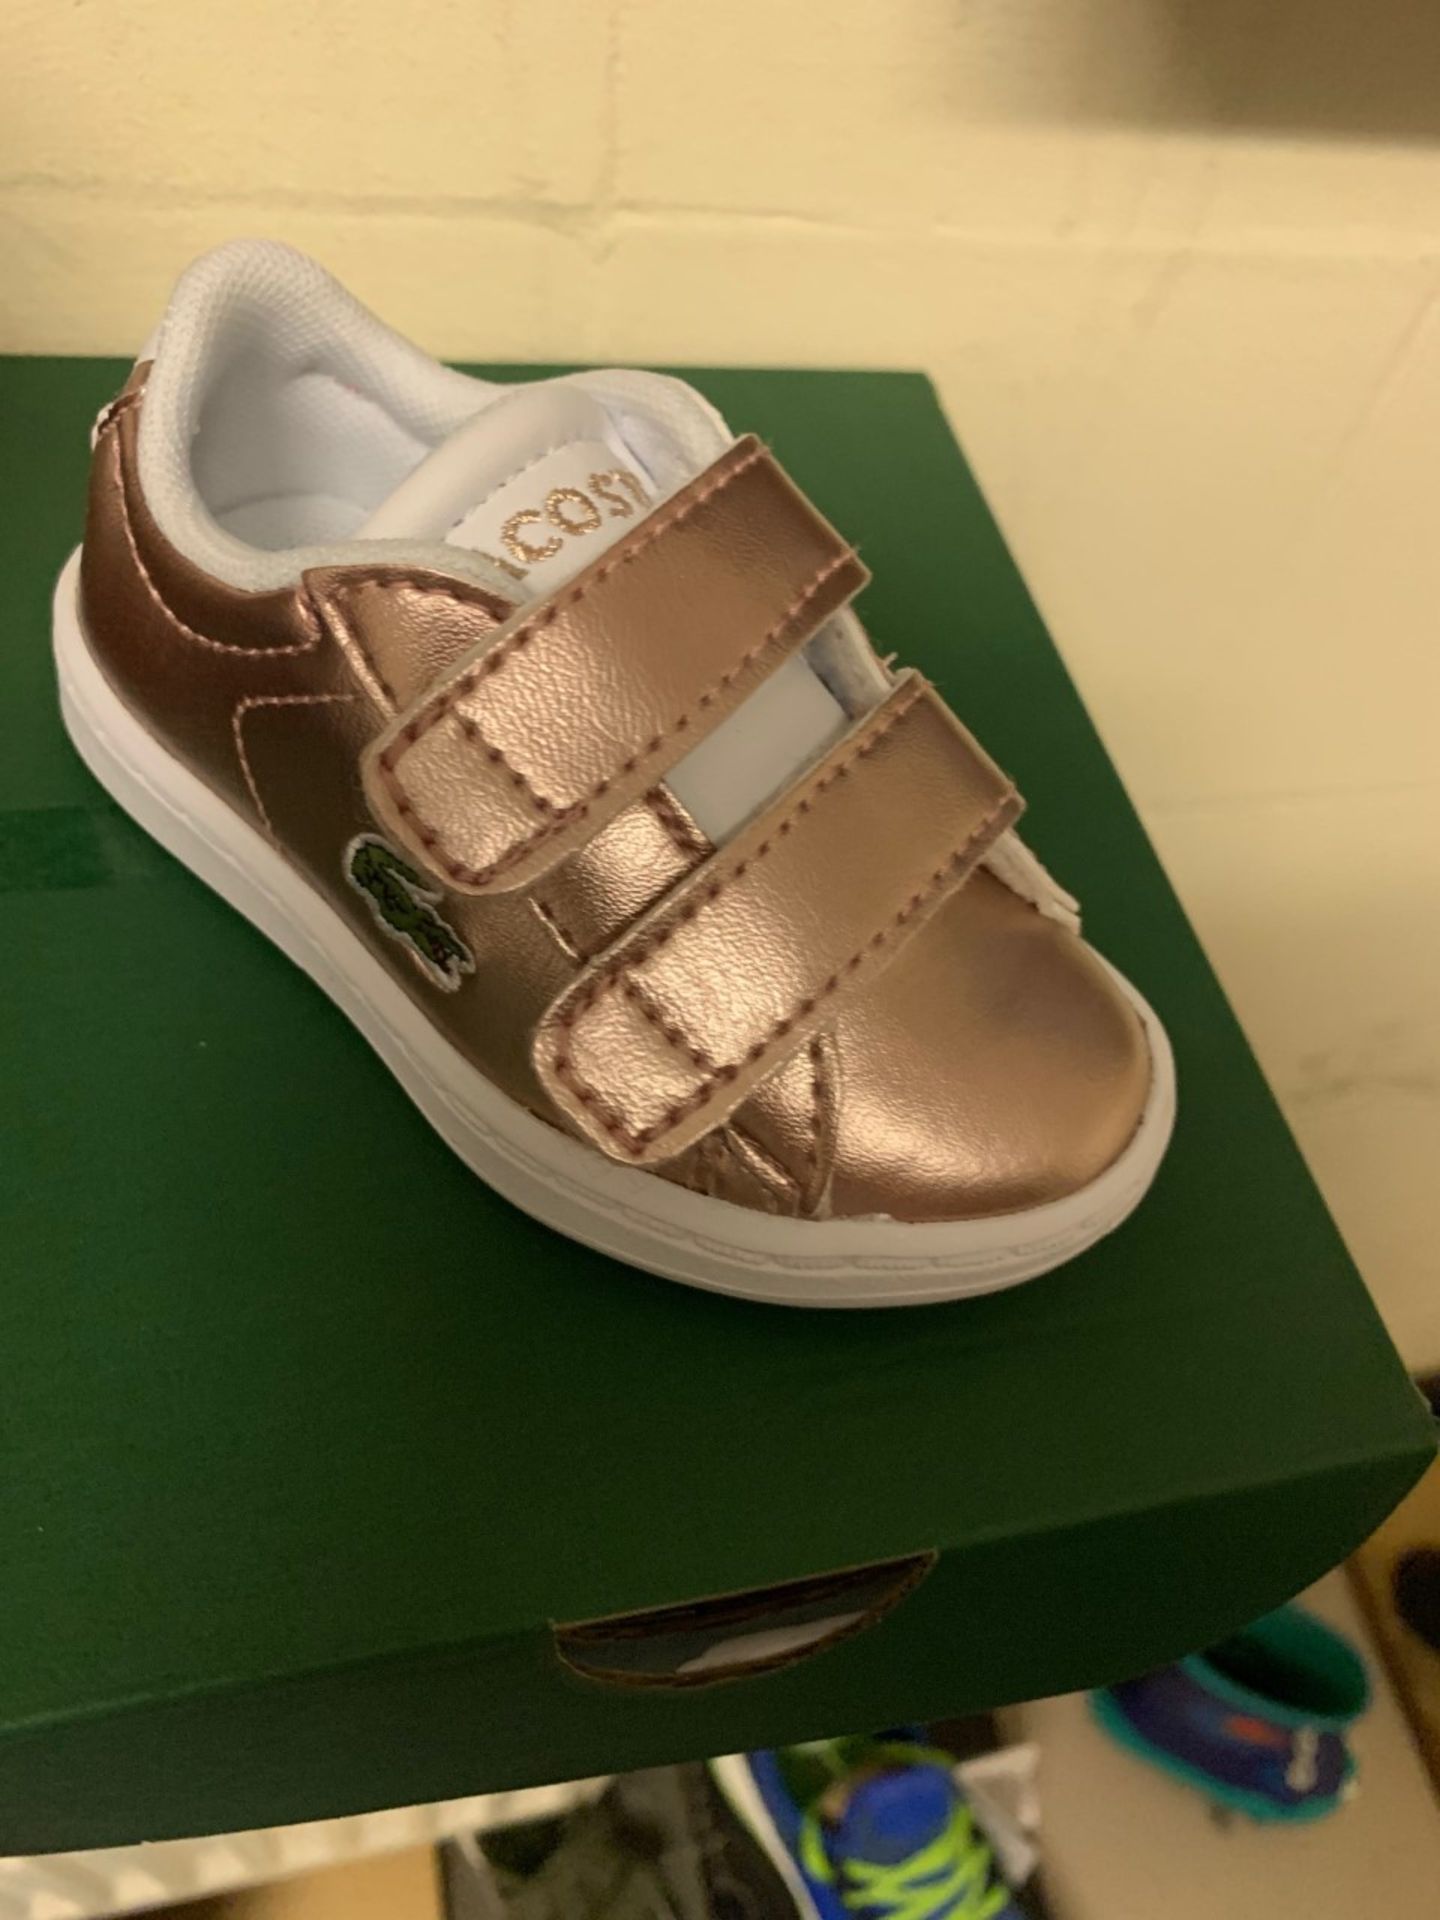 NEW & BOXED LACOSTE ROSE GOLD TRAINER SIZE INFANT 3